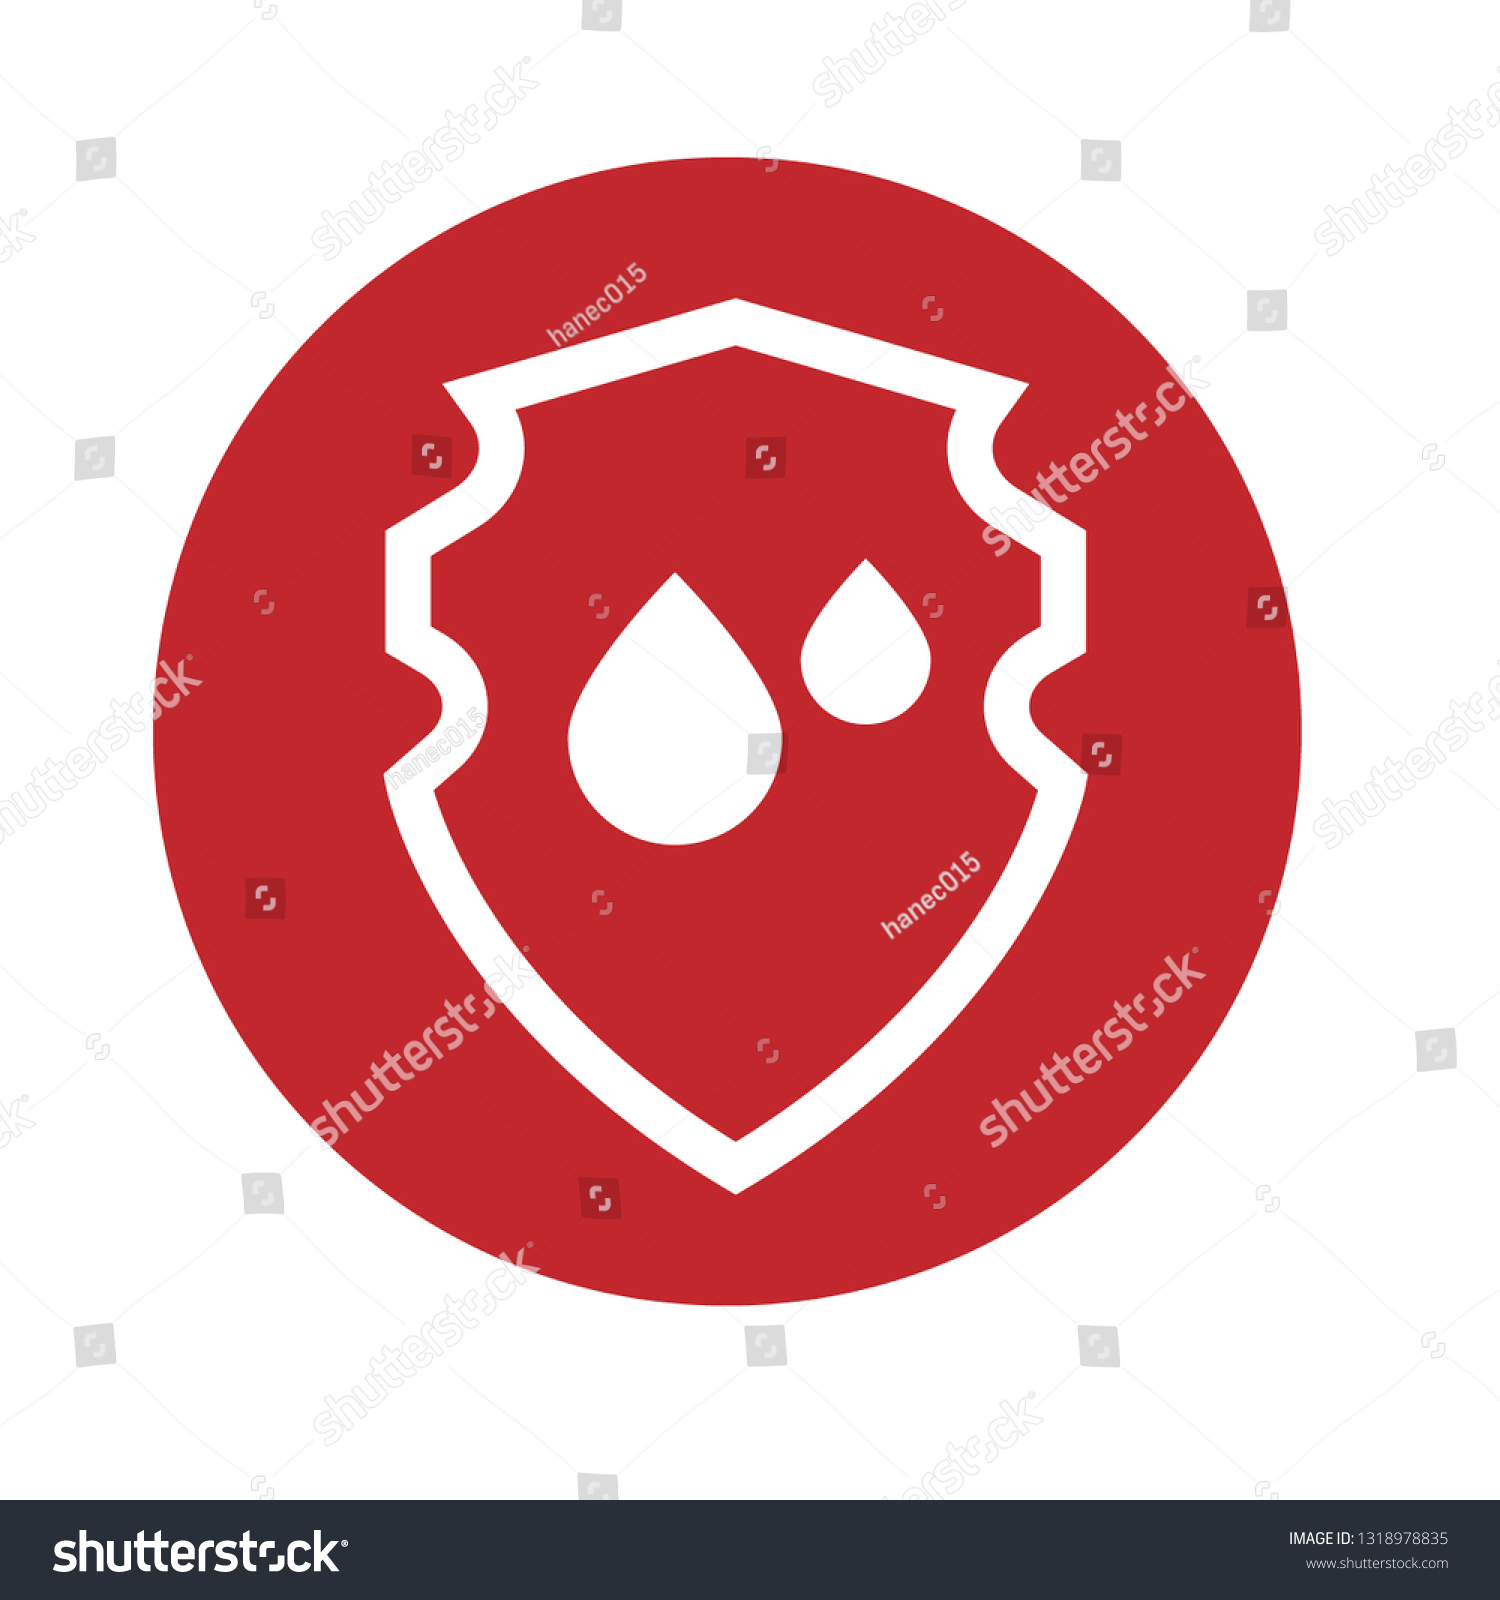 waterproof vector icon.drop and coat of arms symbol. Can be used as icon for security, protected graphic object. transparent object #1318978835